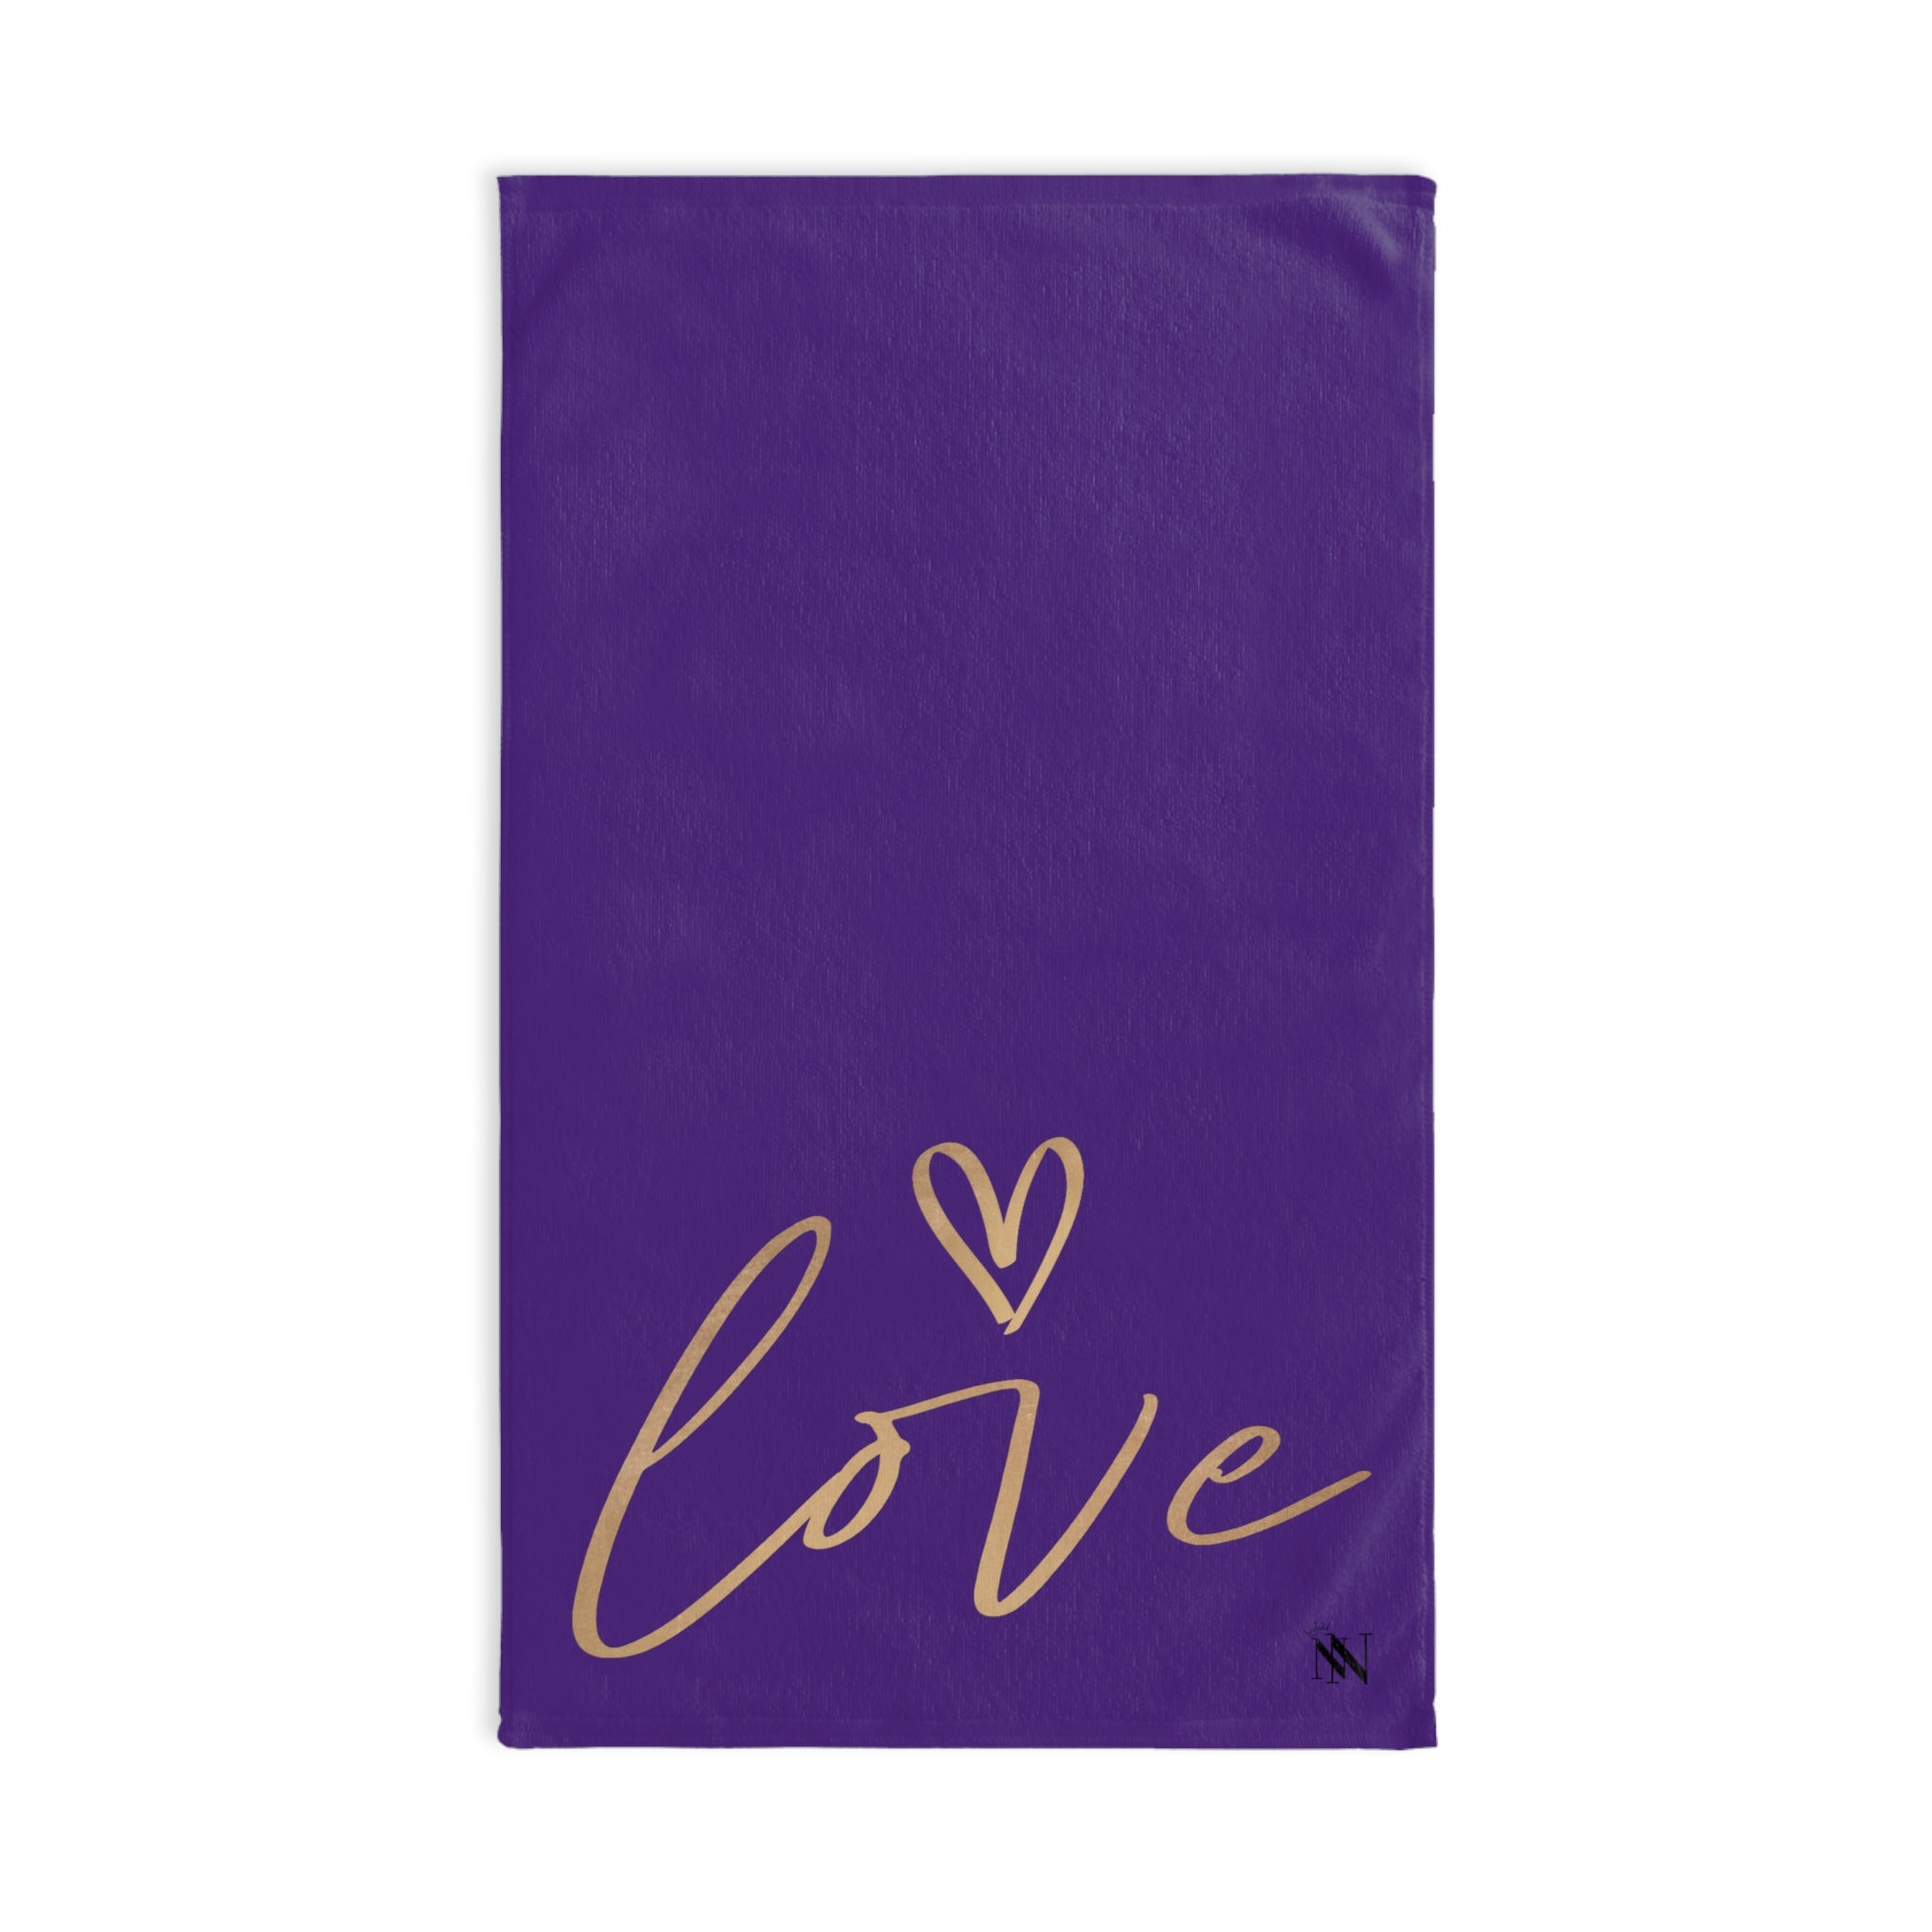 Gold Love Heart Purple | Funny Gifts for Men - Gifts for Him - Birthday Gifts for Men, Him, Husband, Boyfriend, New Couple Gifts, Fathers & Valentines Day Gifts, Christmas Gifts NECTAR NAPKINS